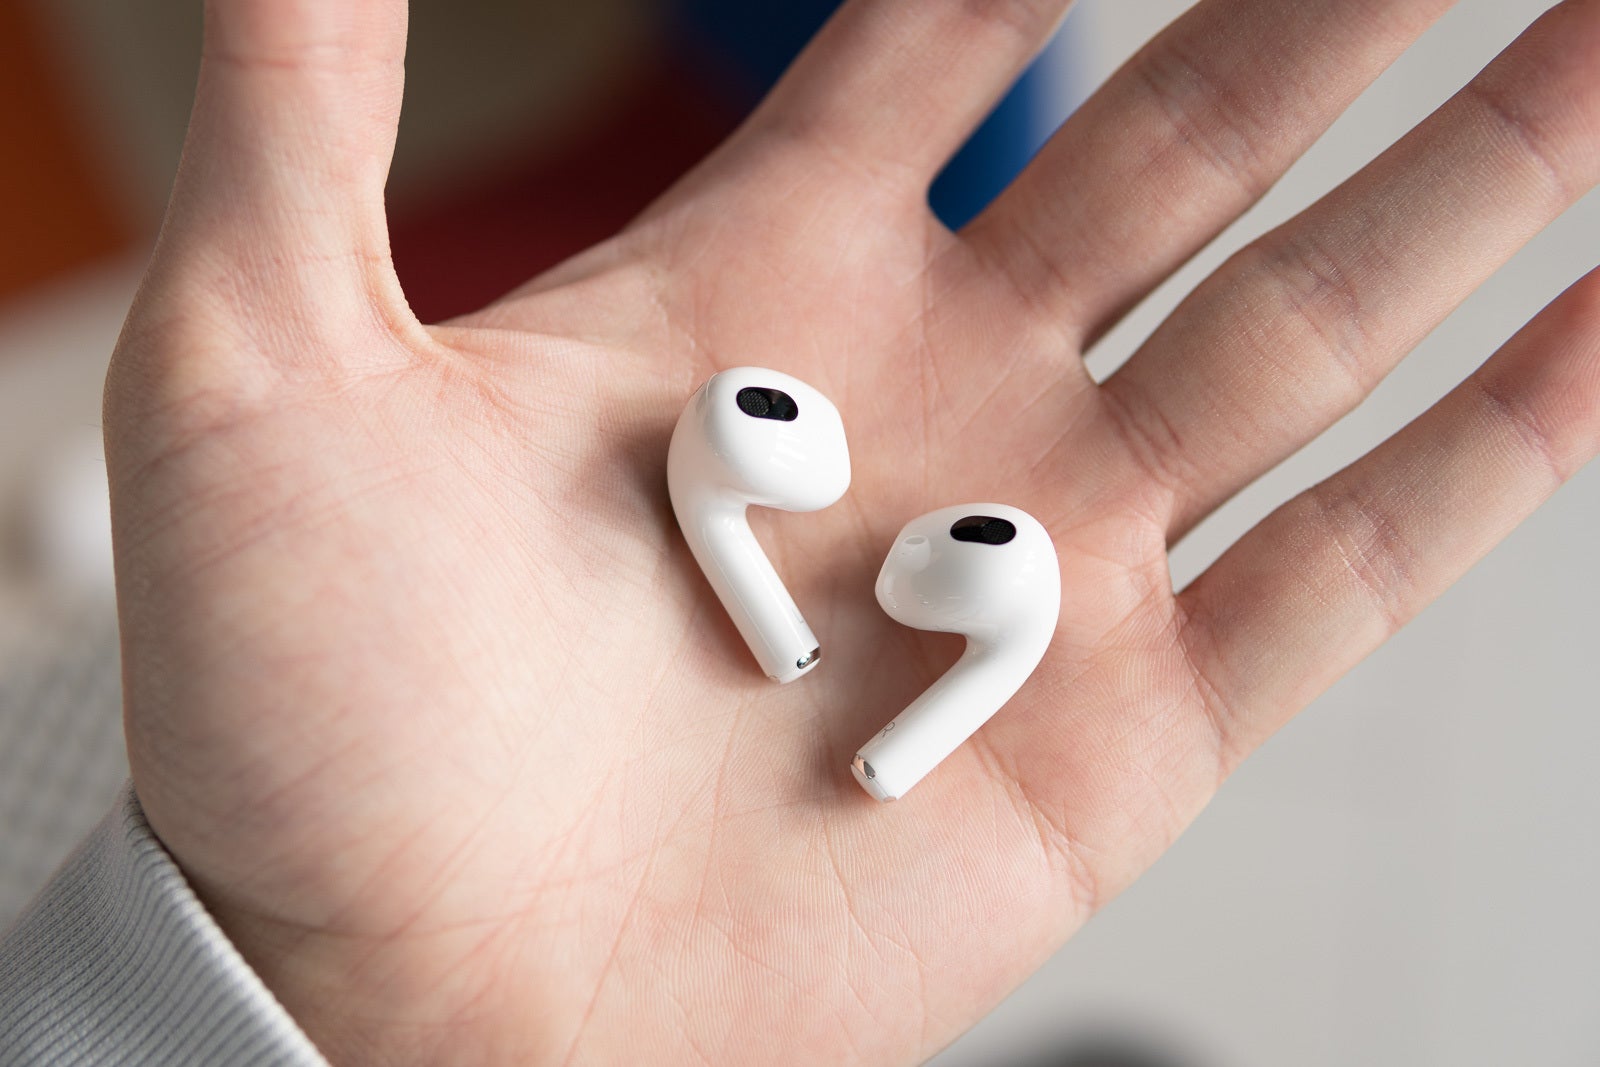 Apple is looking at moving some AirPods production to China - Report says Apple is planning to move some AirPods production to India